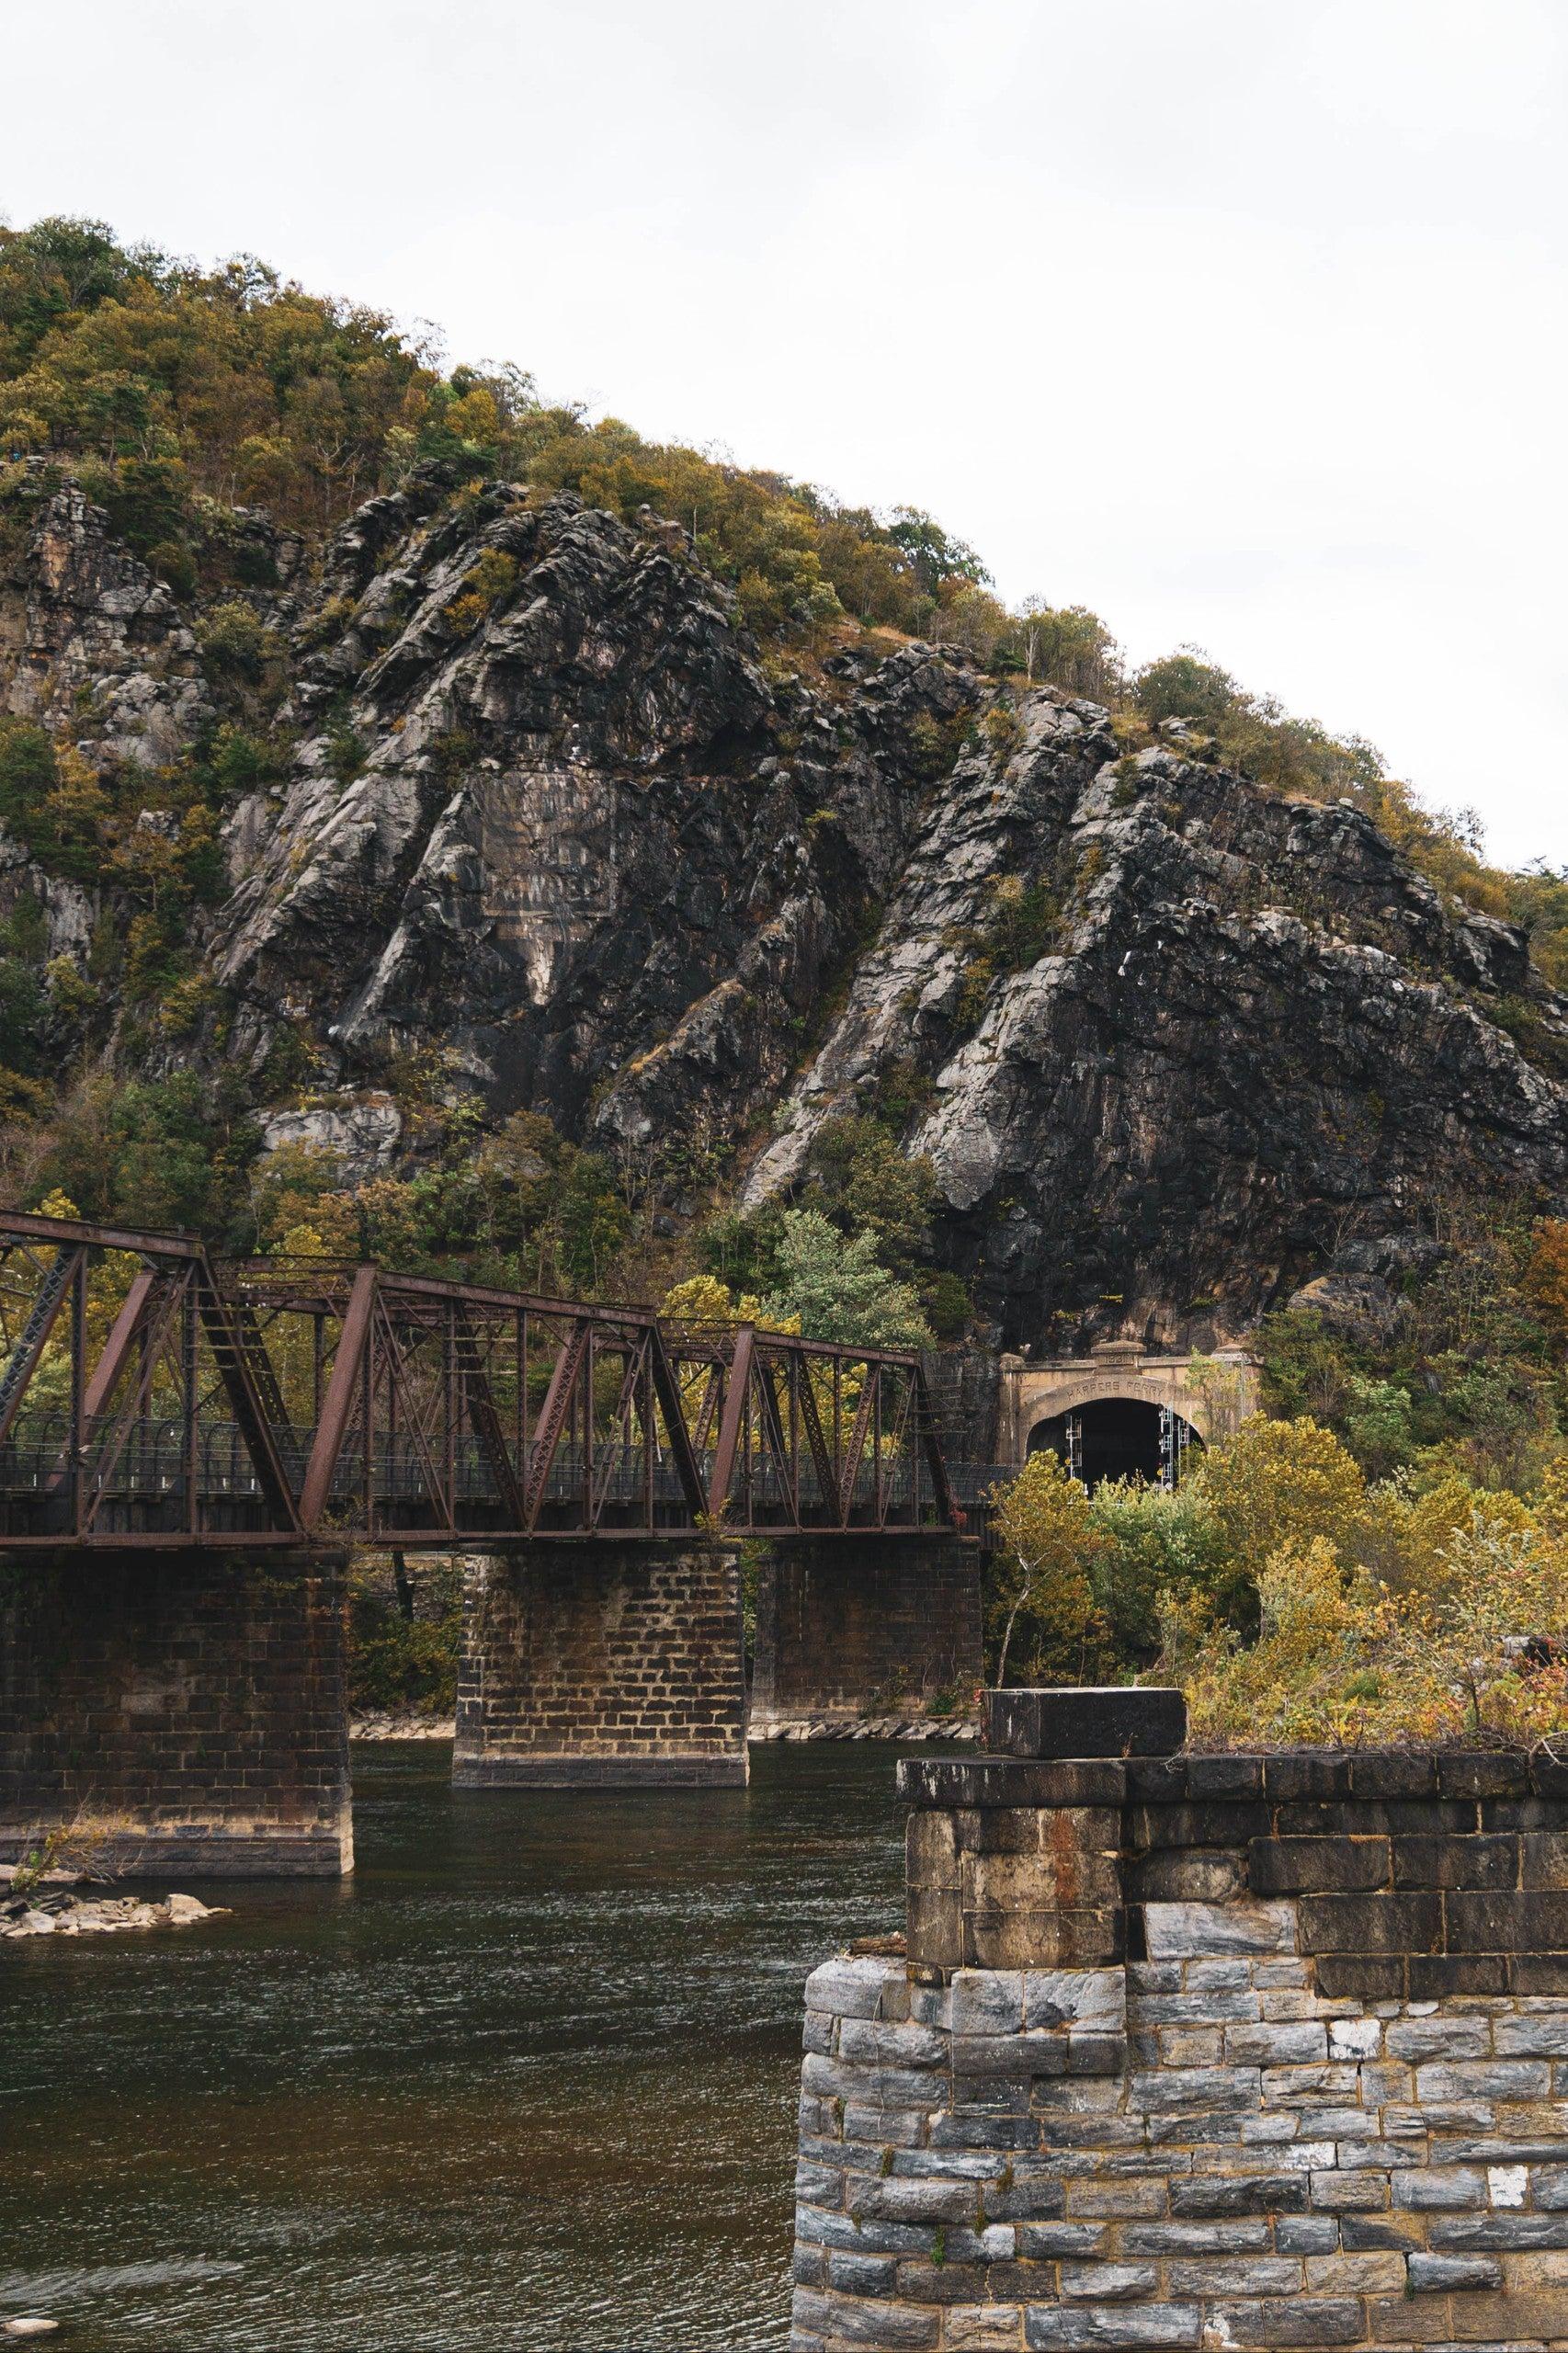 Pet Friendly Photo-Tour of Historic Harpers Ferry